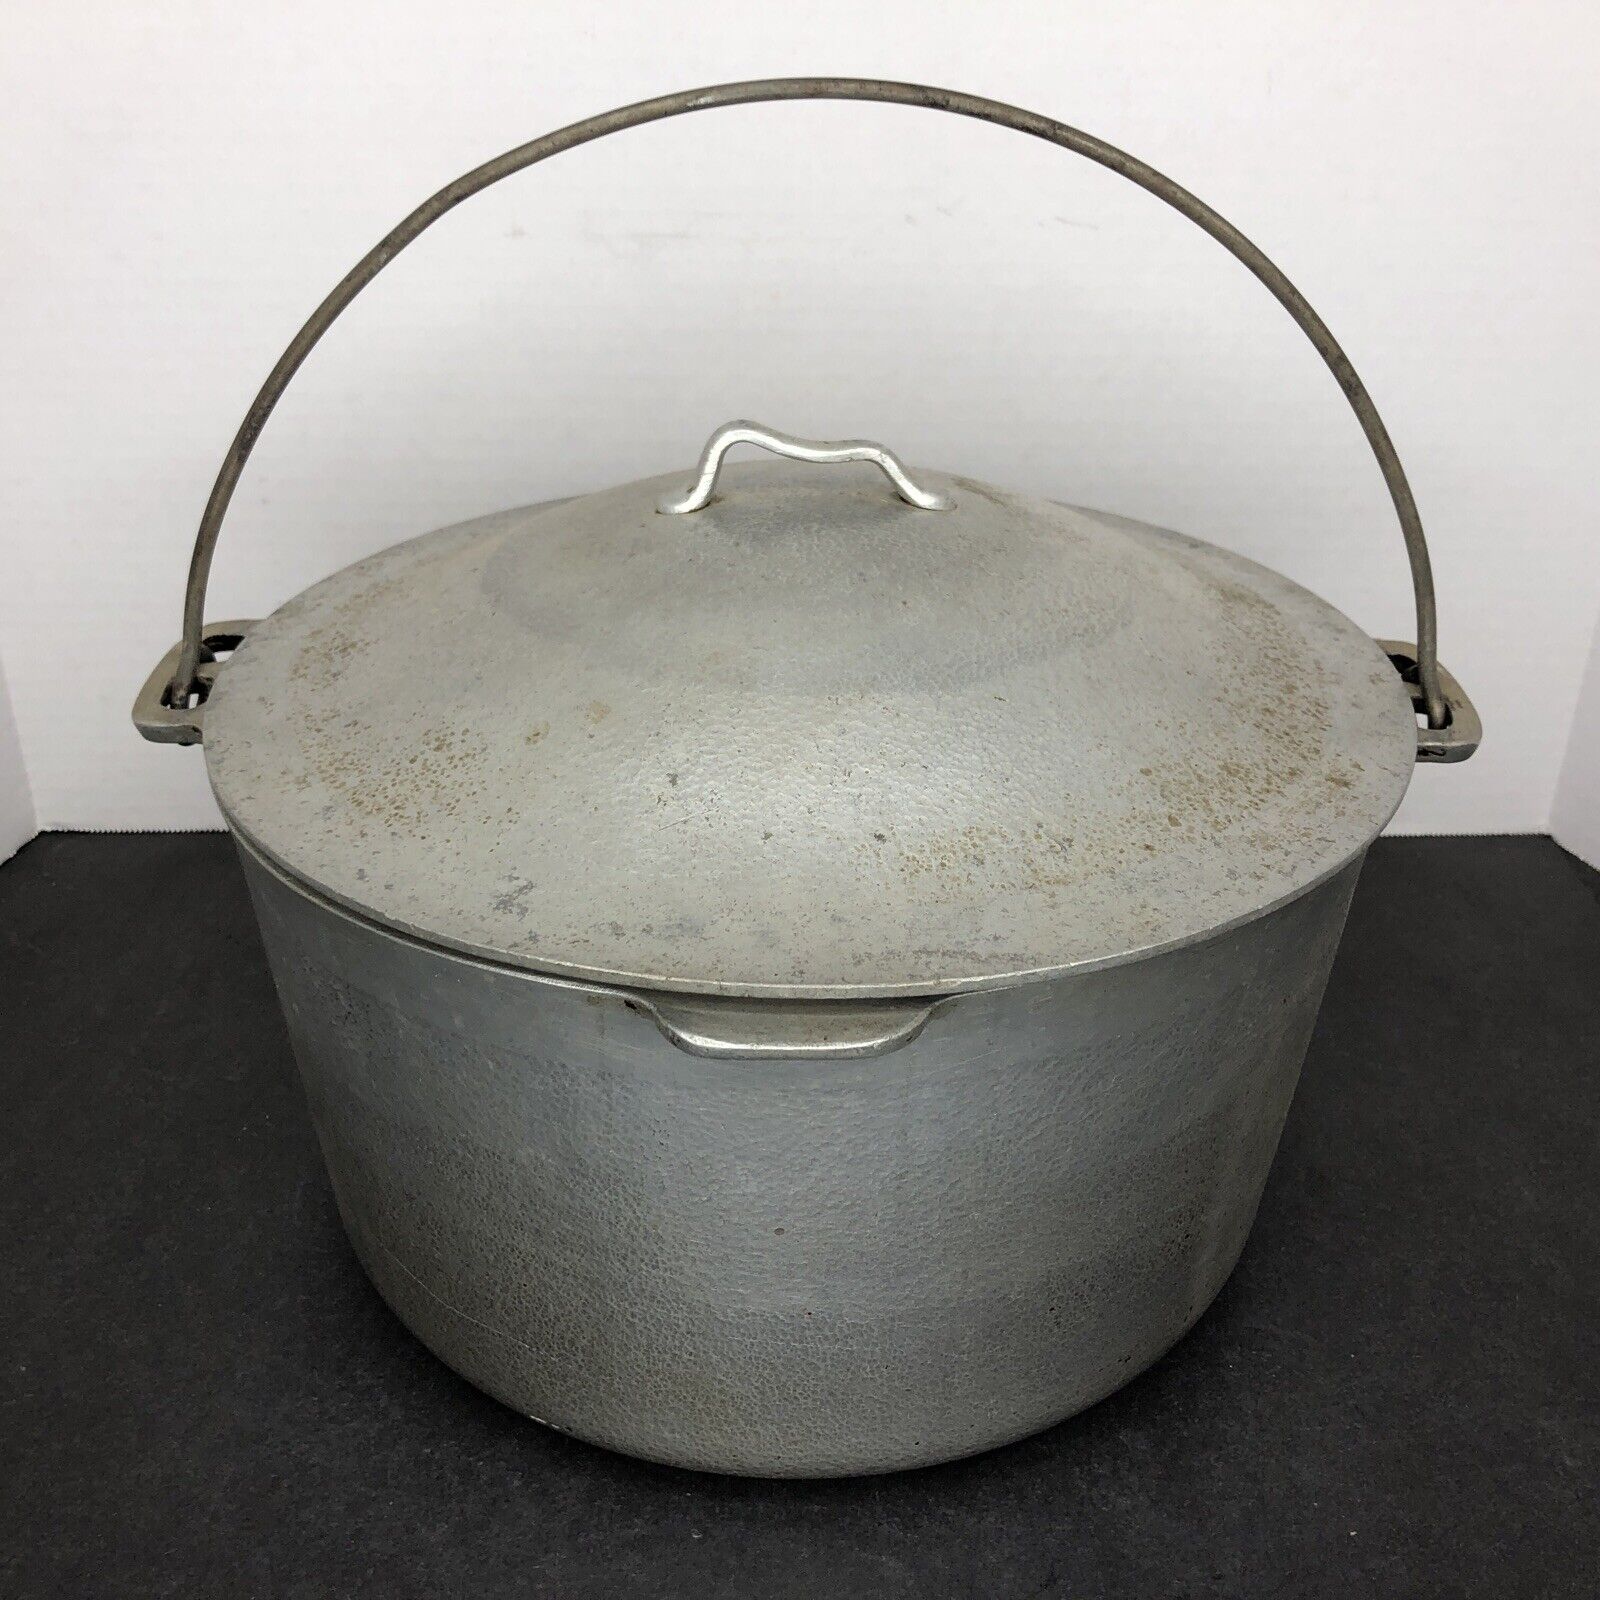 Vintage Therm-O-Craft Cookware 6 Quart Aluminum Dutch Oven Lid Hammered Finish